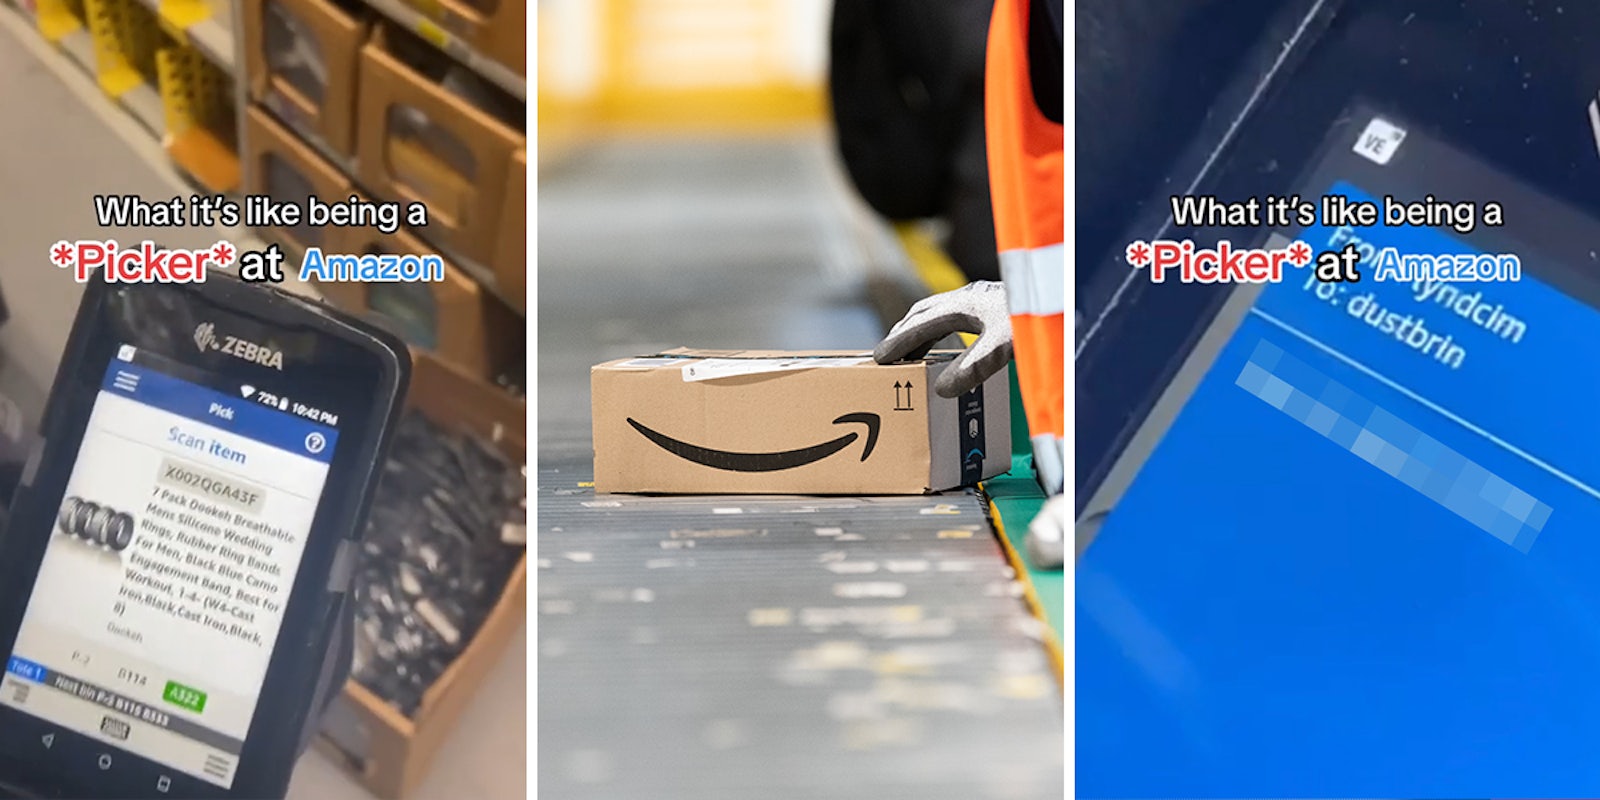 Amazon picker with scanner with caption 'What it's like being a *Picker* at Amazon' (l) Amazon worker with box (c) Amazon picker with scanner with caption 'What it's like being a *Picker* at Amazon' (r)